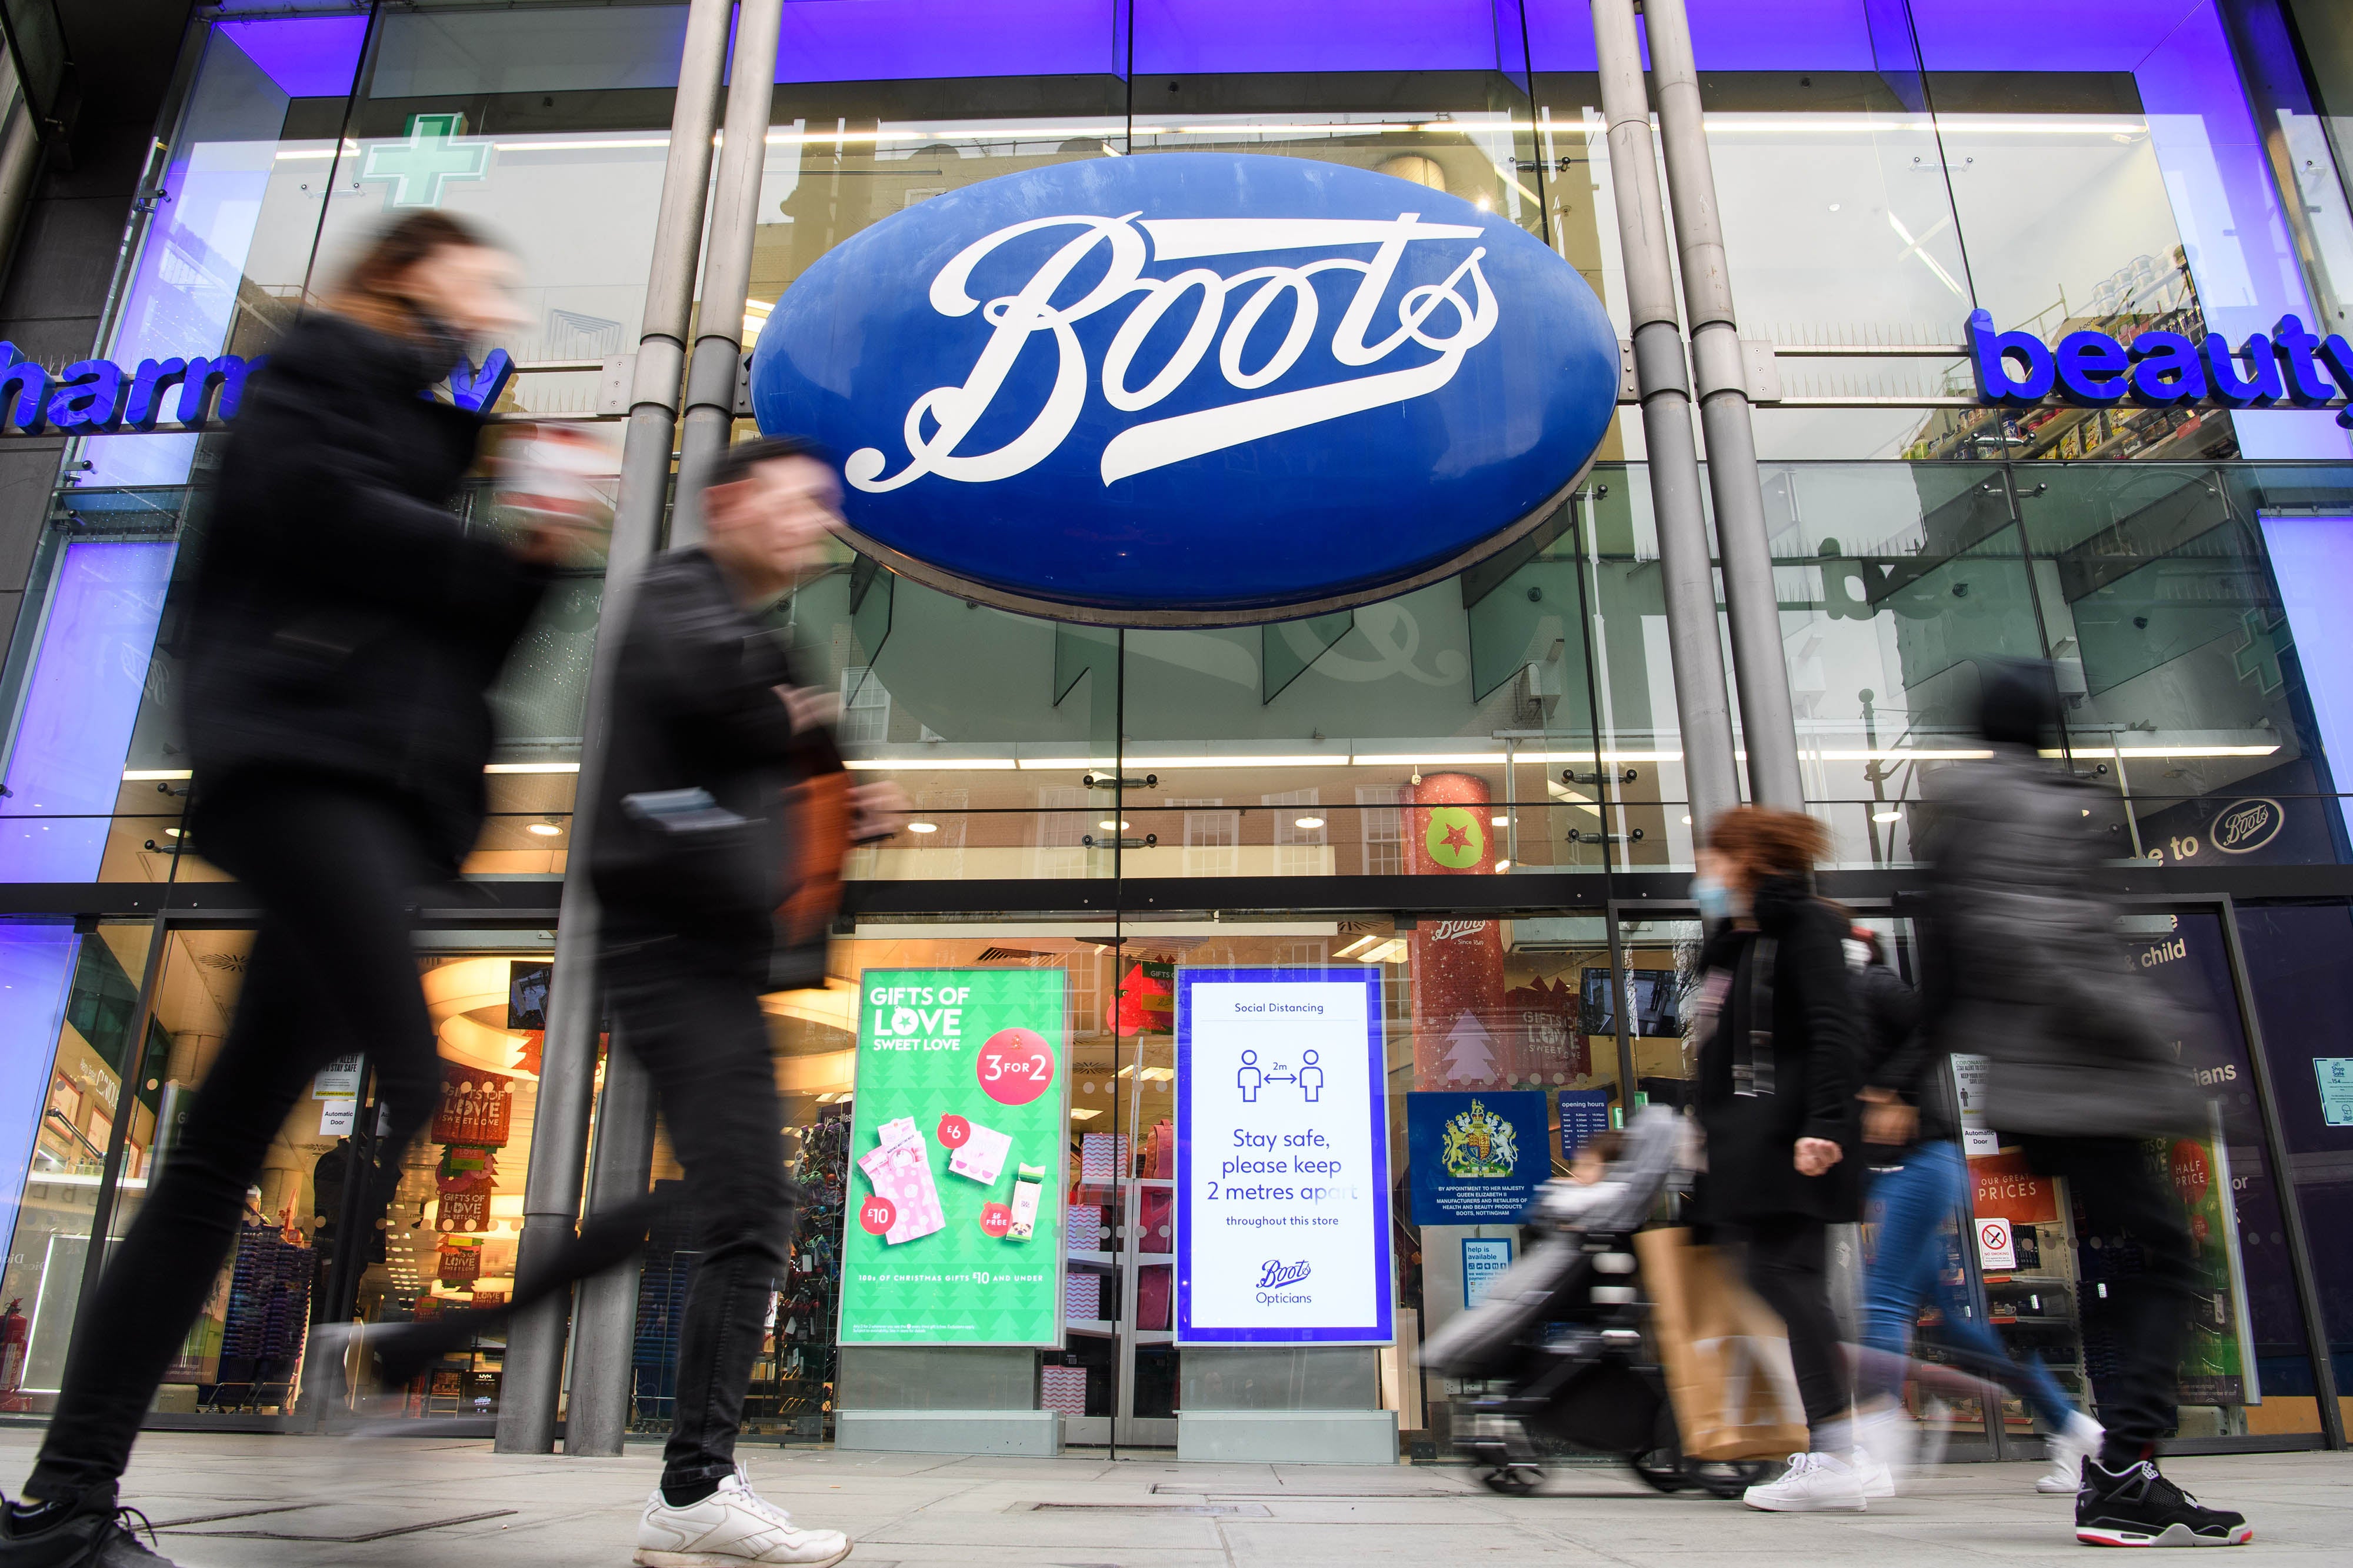 Sales through Boots’ online business had doubled against pre-pandemic levels (Matt Crossick/PA)